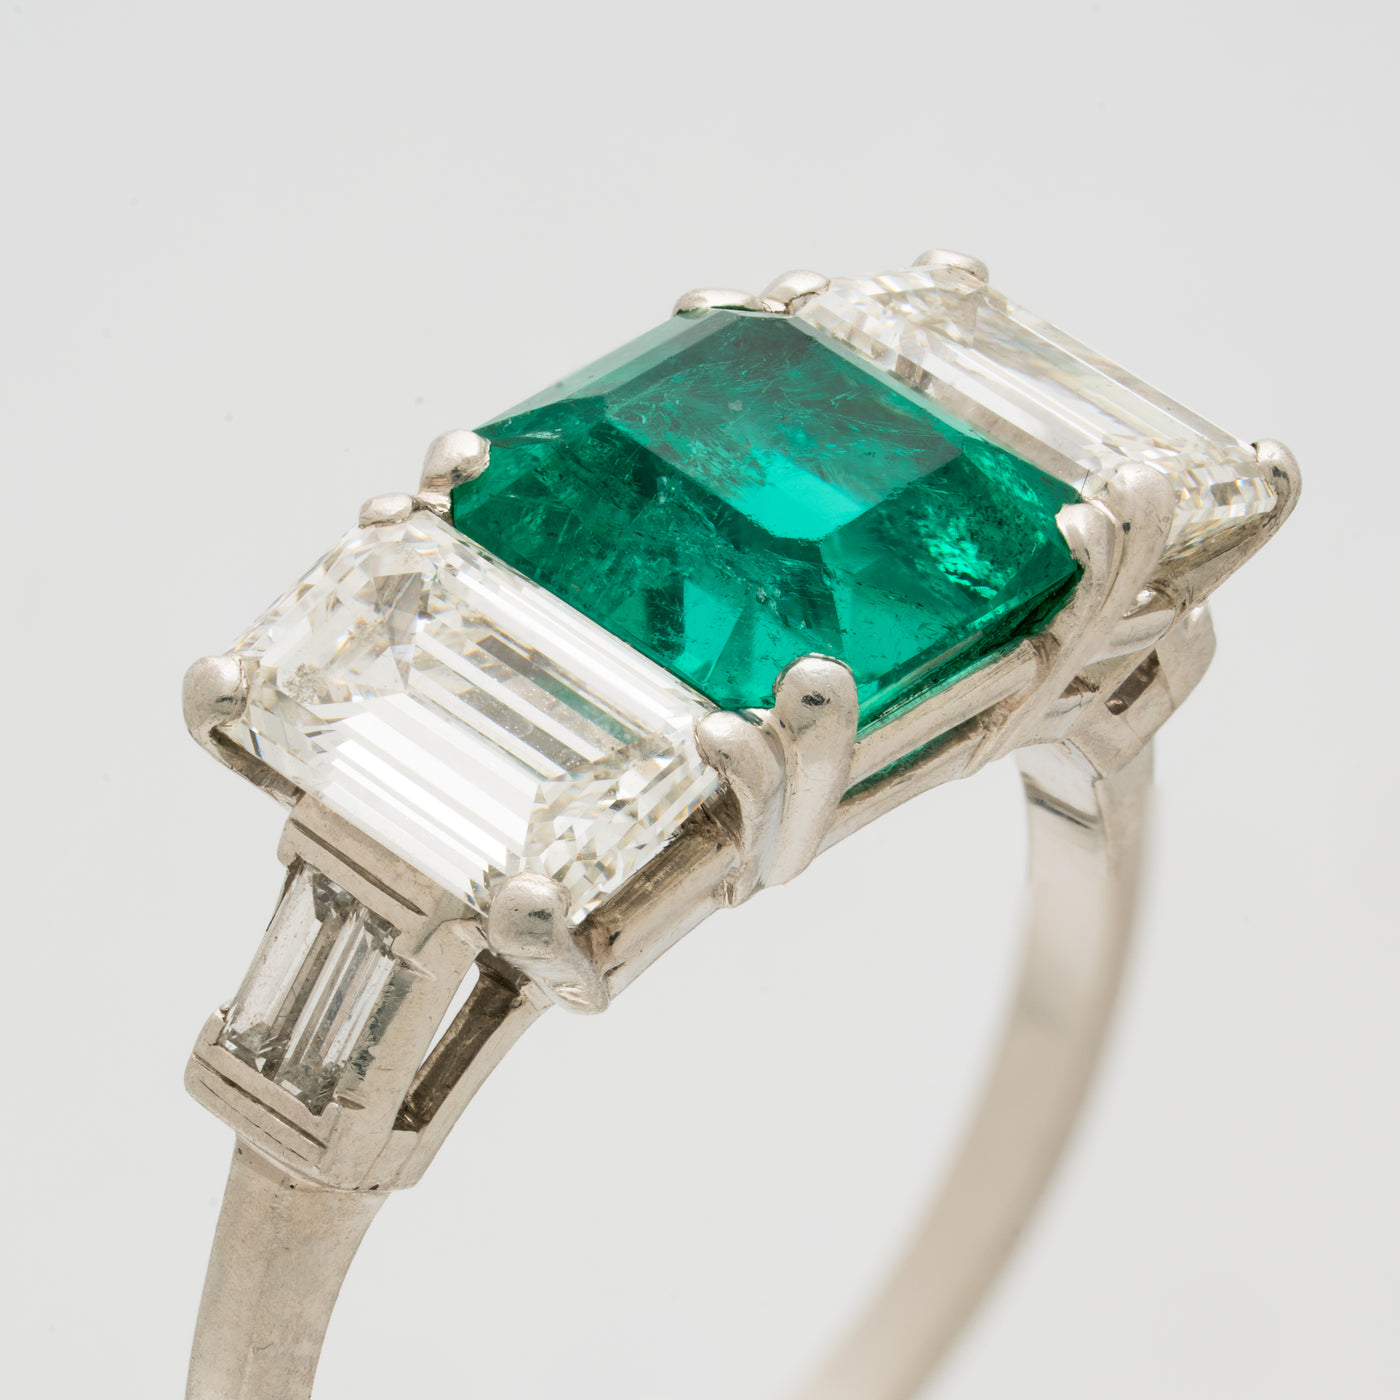 VINTAGE PLATINUM 1.20ct COLOMBIAN EMERALD AND 1.10ct EMERALD CUT DIAMOND RING c.1950s